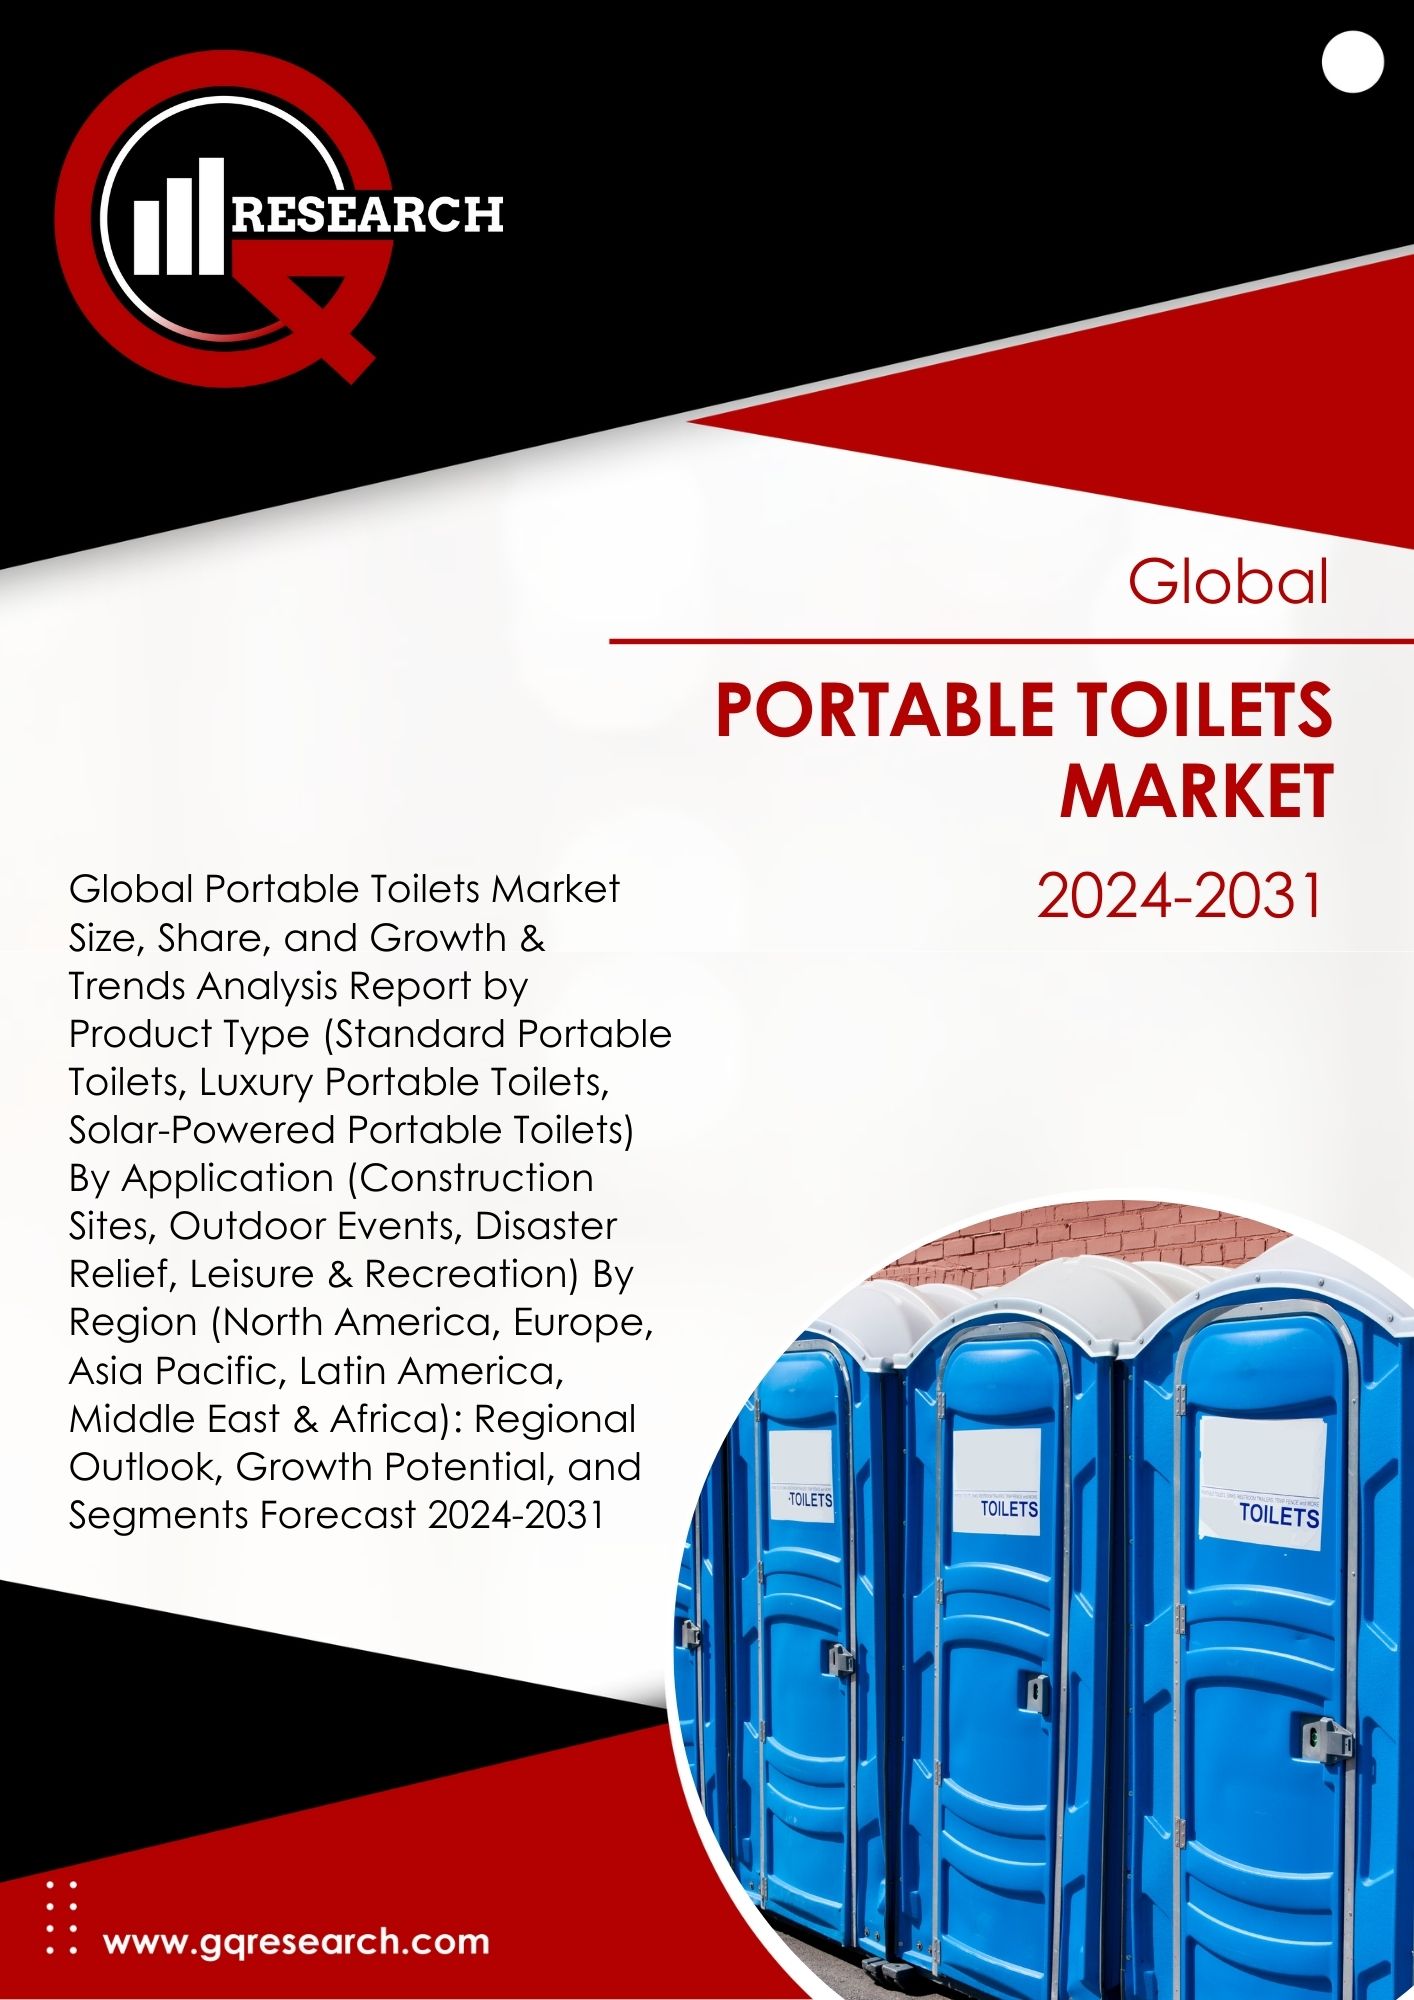 Portable Toilets Market Growth, Share, Size Analysis and Forecast to 2031 | GQ Research